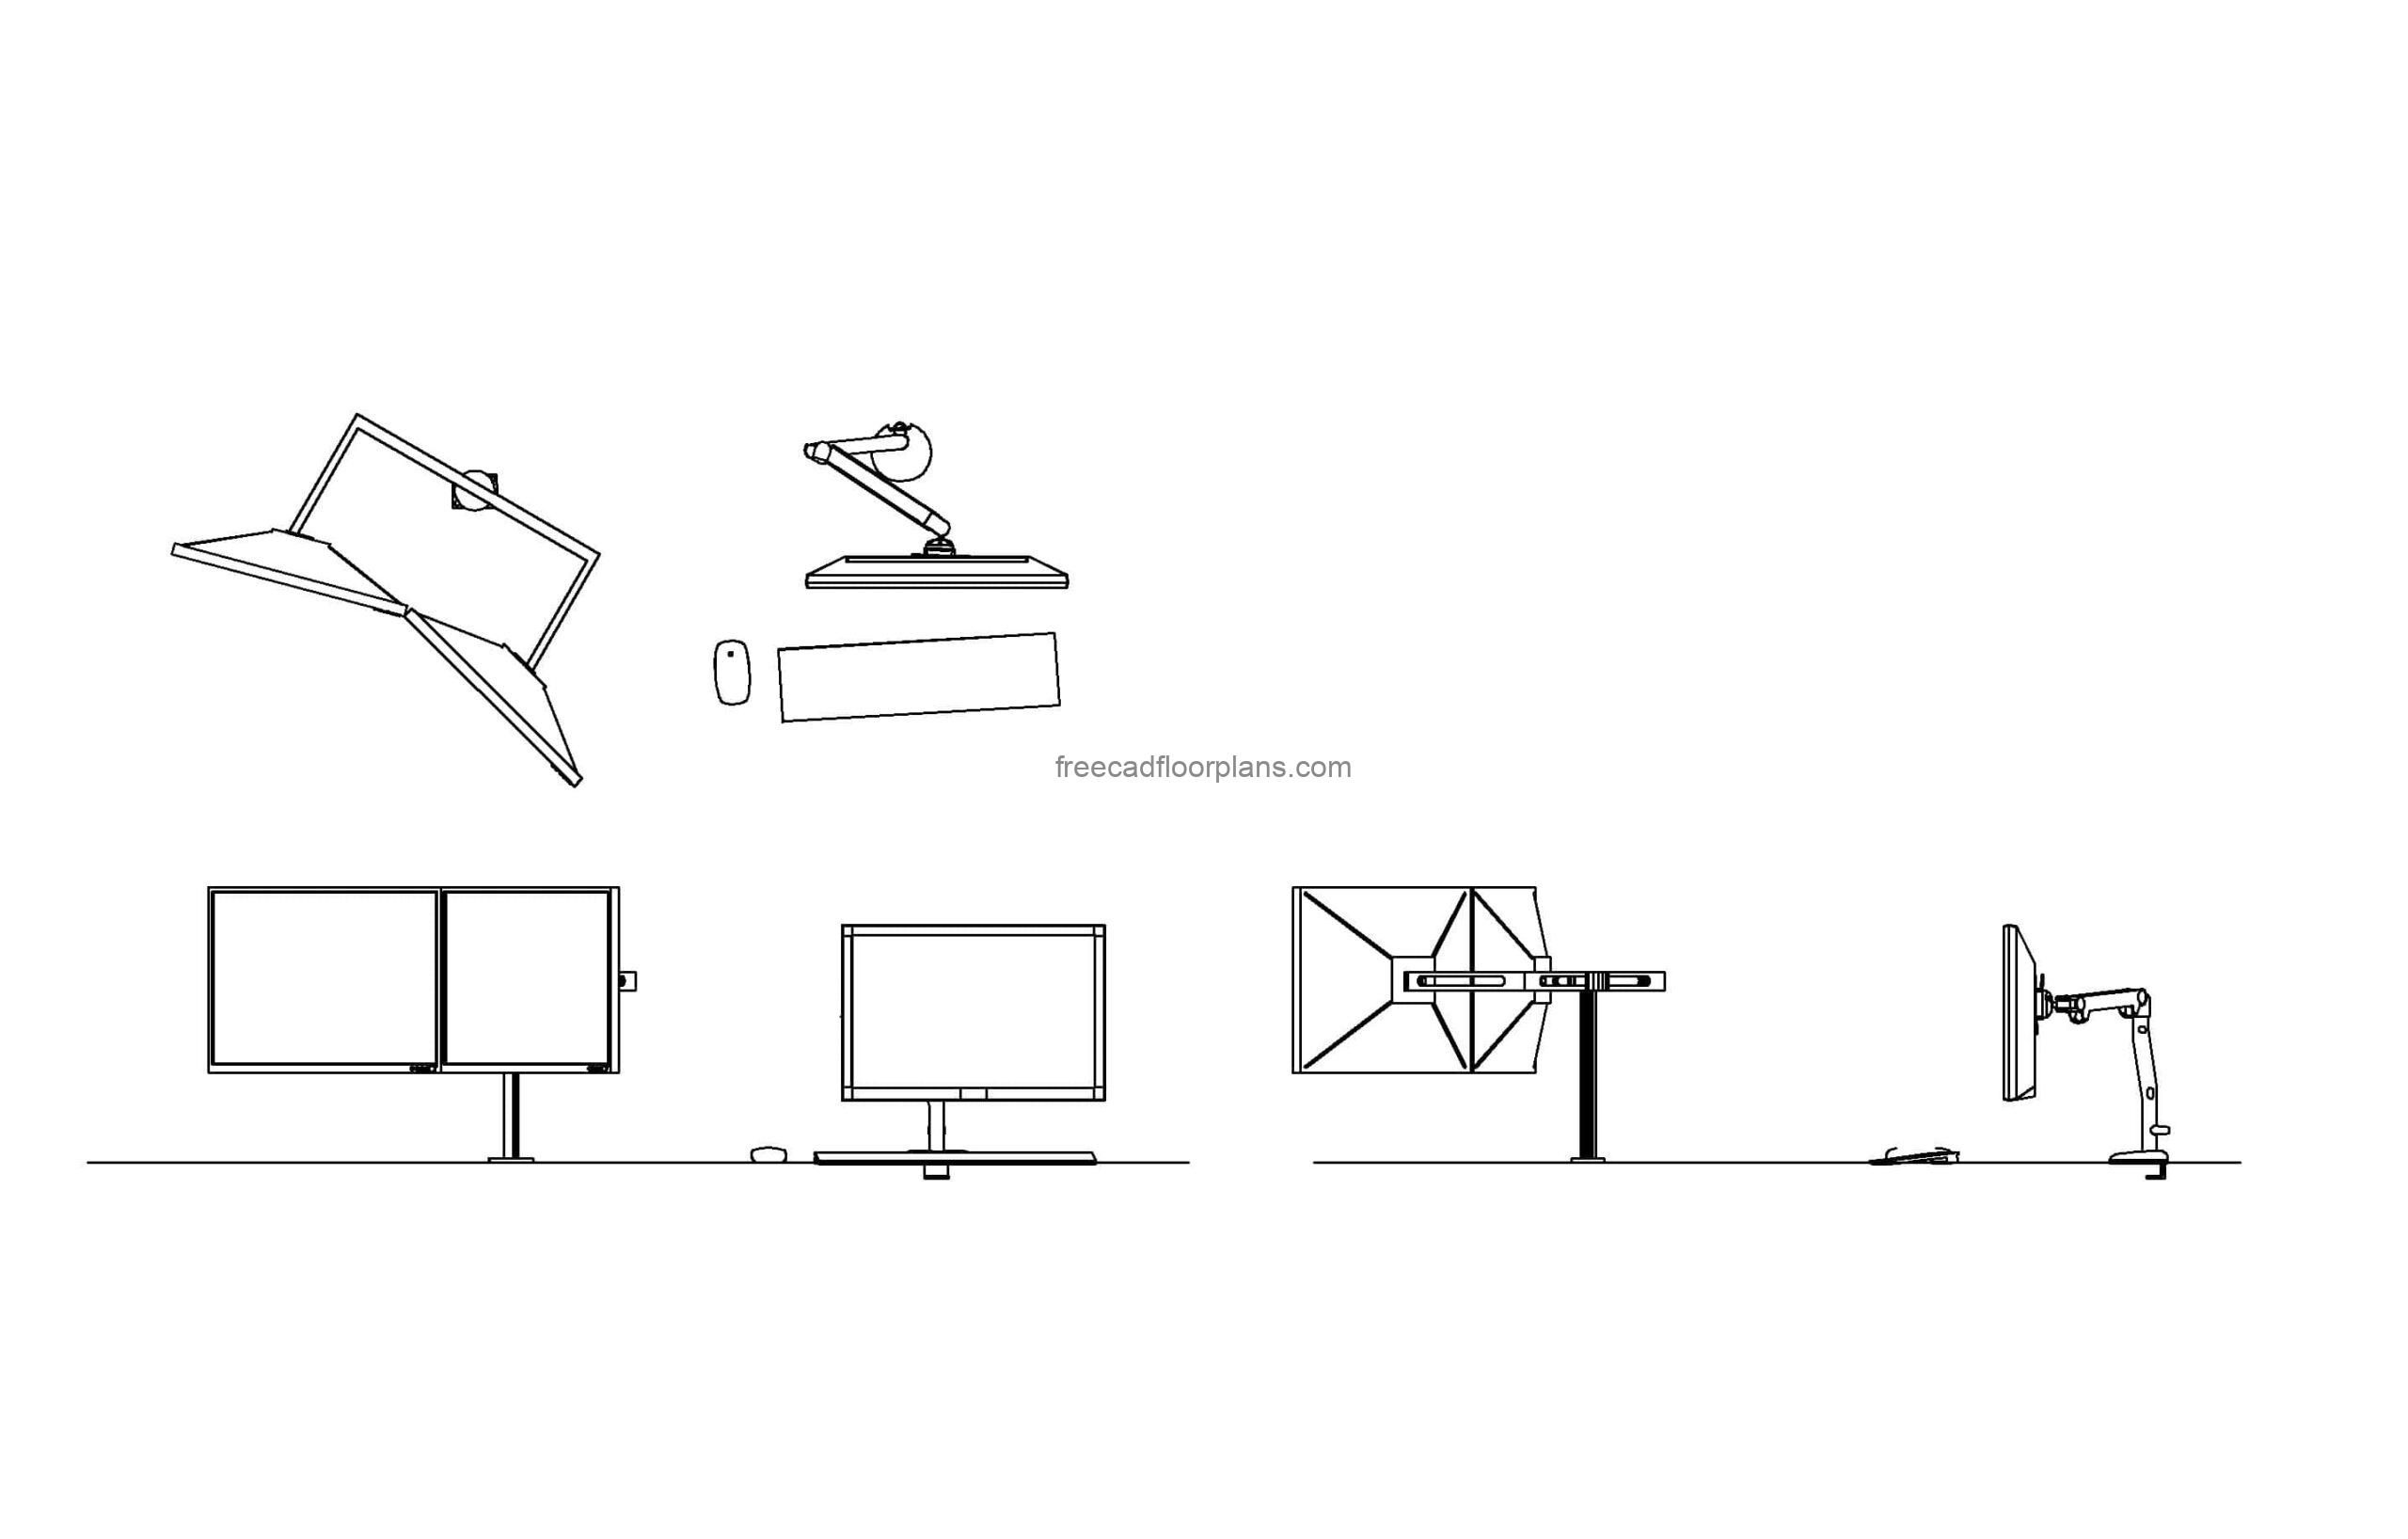 autocad drawing of a monitor arm with dual monitor, dwg file, plan and elevations 2d views, file for free download